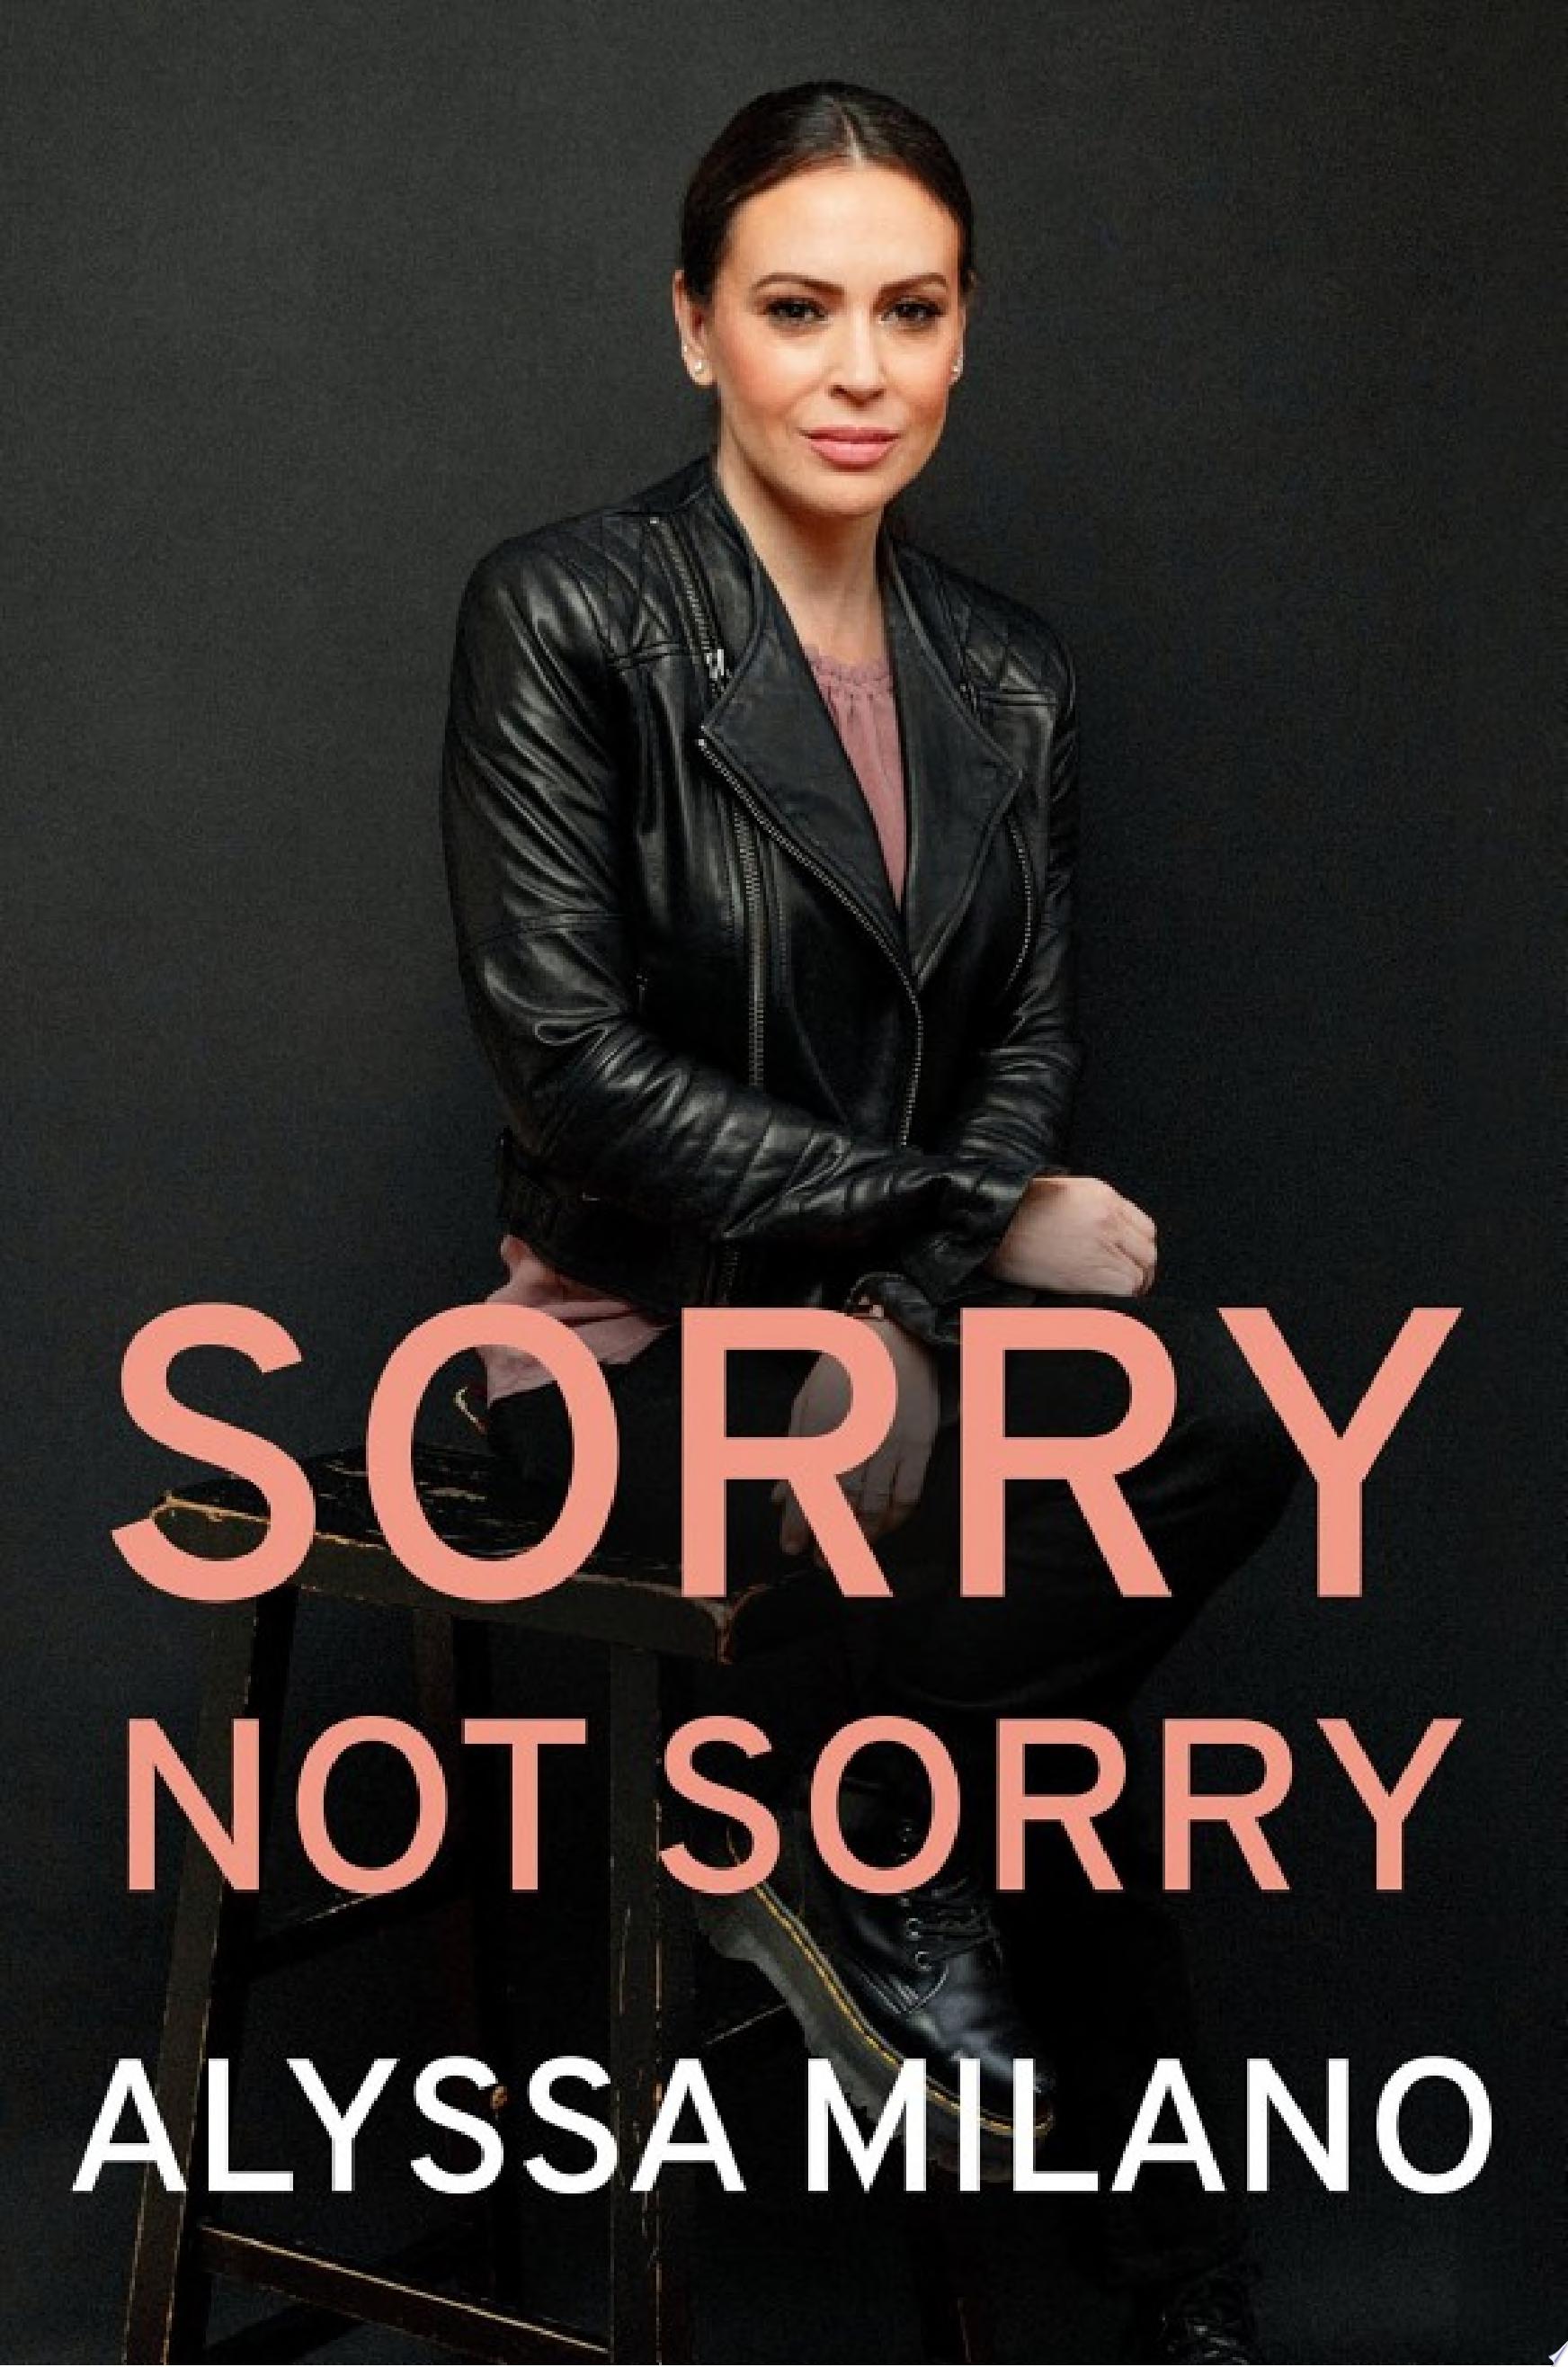 Image for "Sorry Not Sorry"